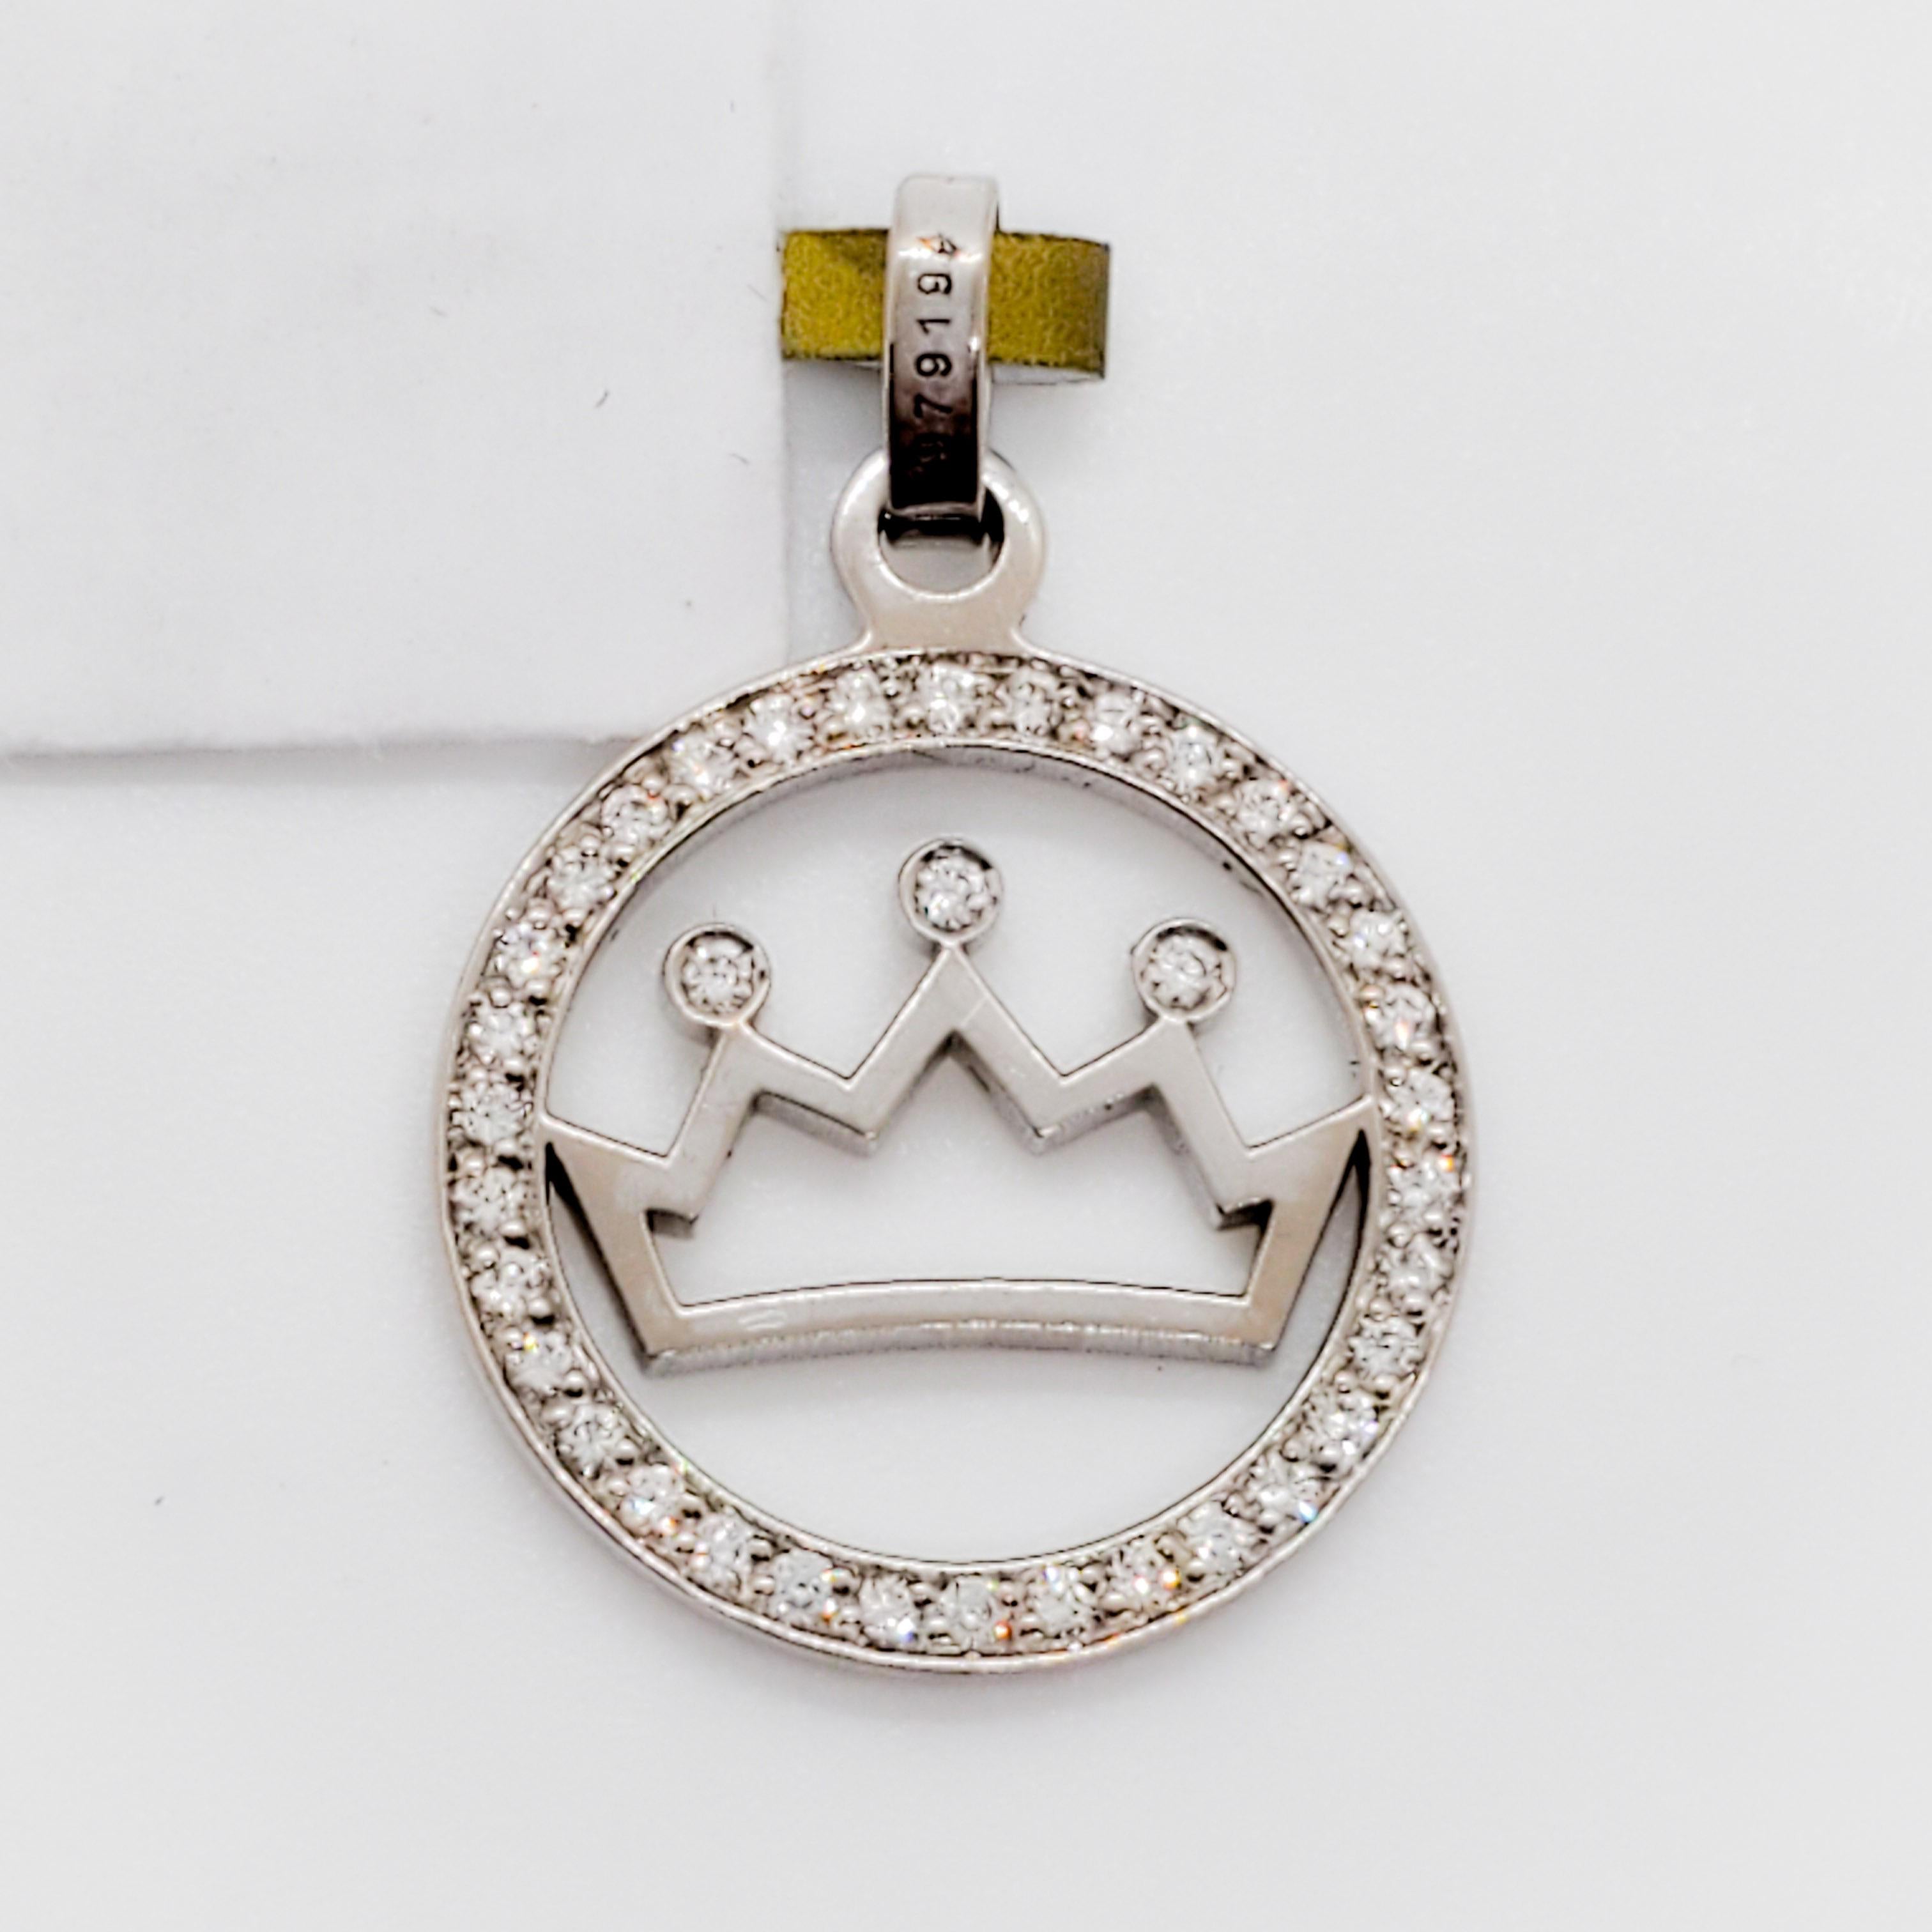 Beautiful Chaumet white diamond round crown pendant.  Ready to be slid onto a chain.  Chain not provided.  18k White gold.  